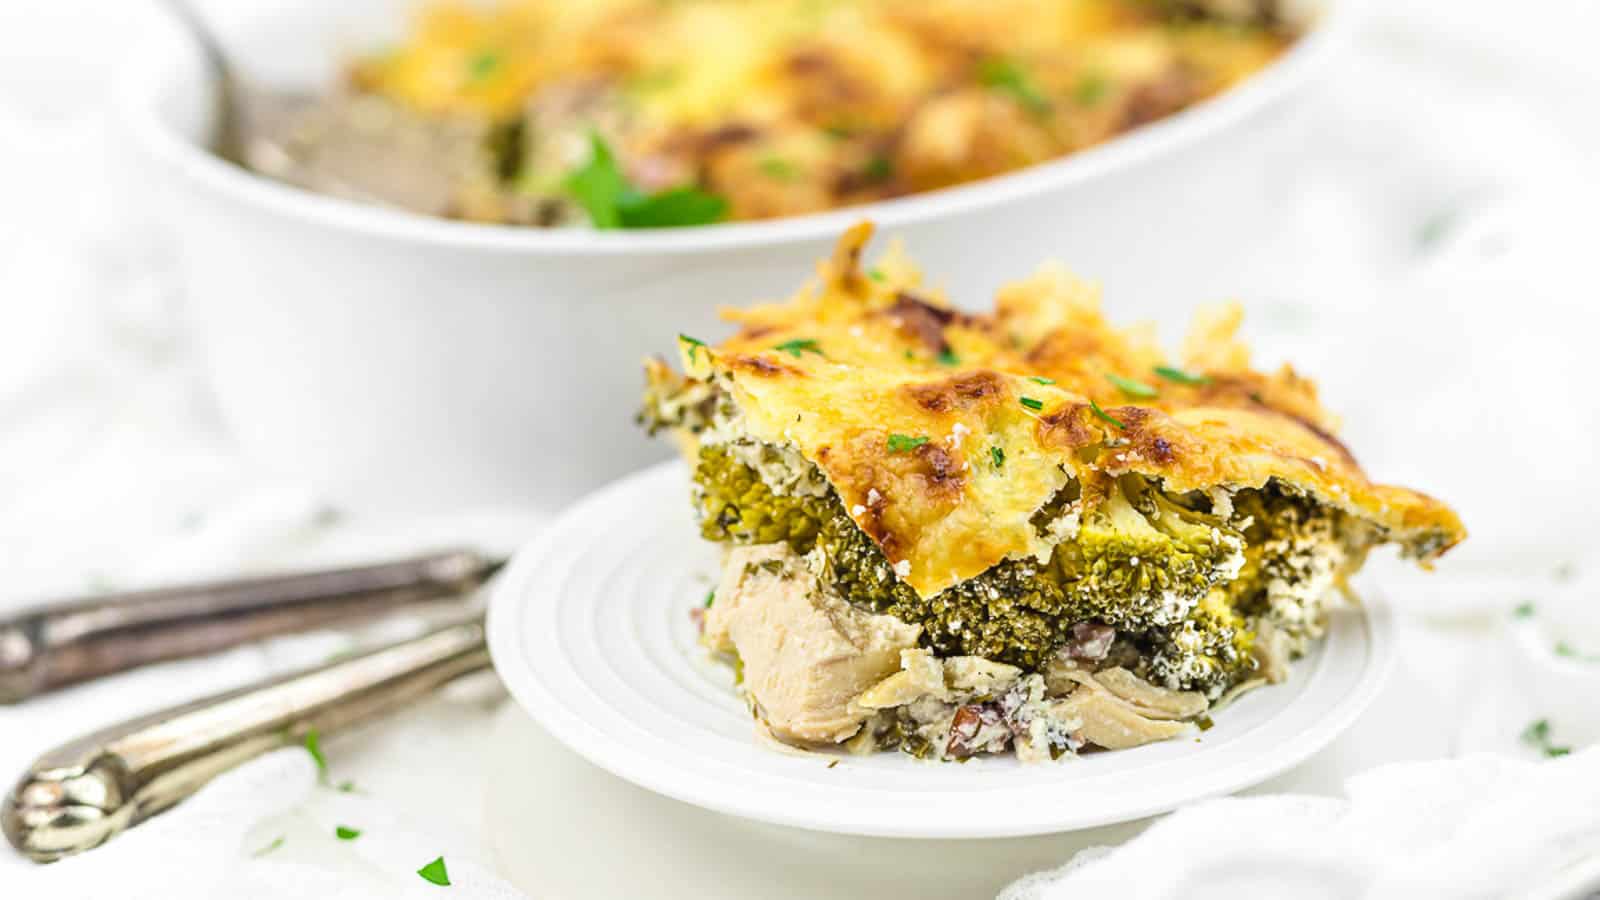 Quick and healthy: 15 low-carb chicken recipes